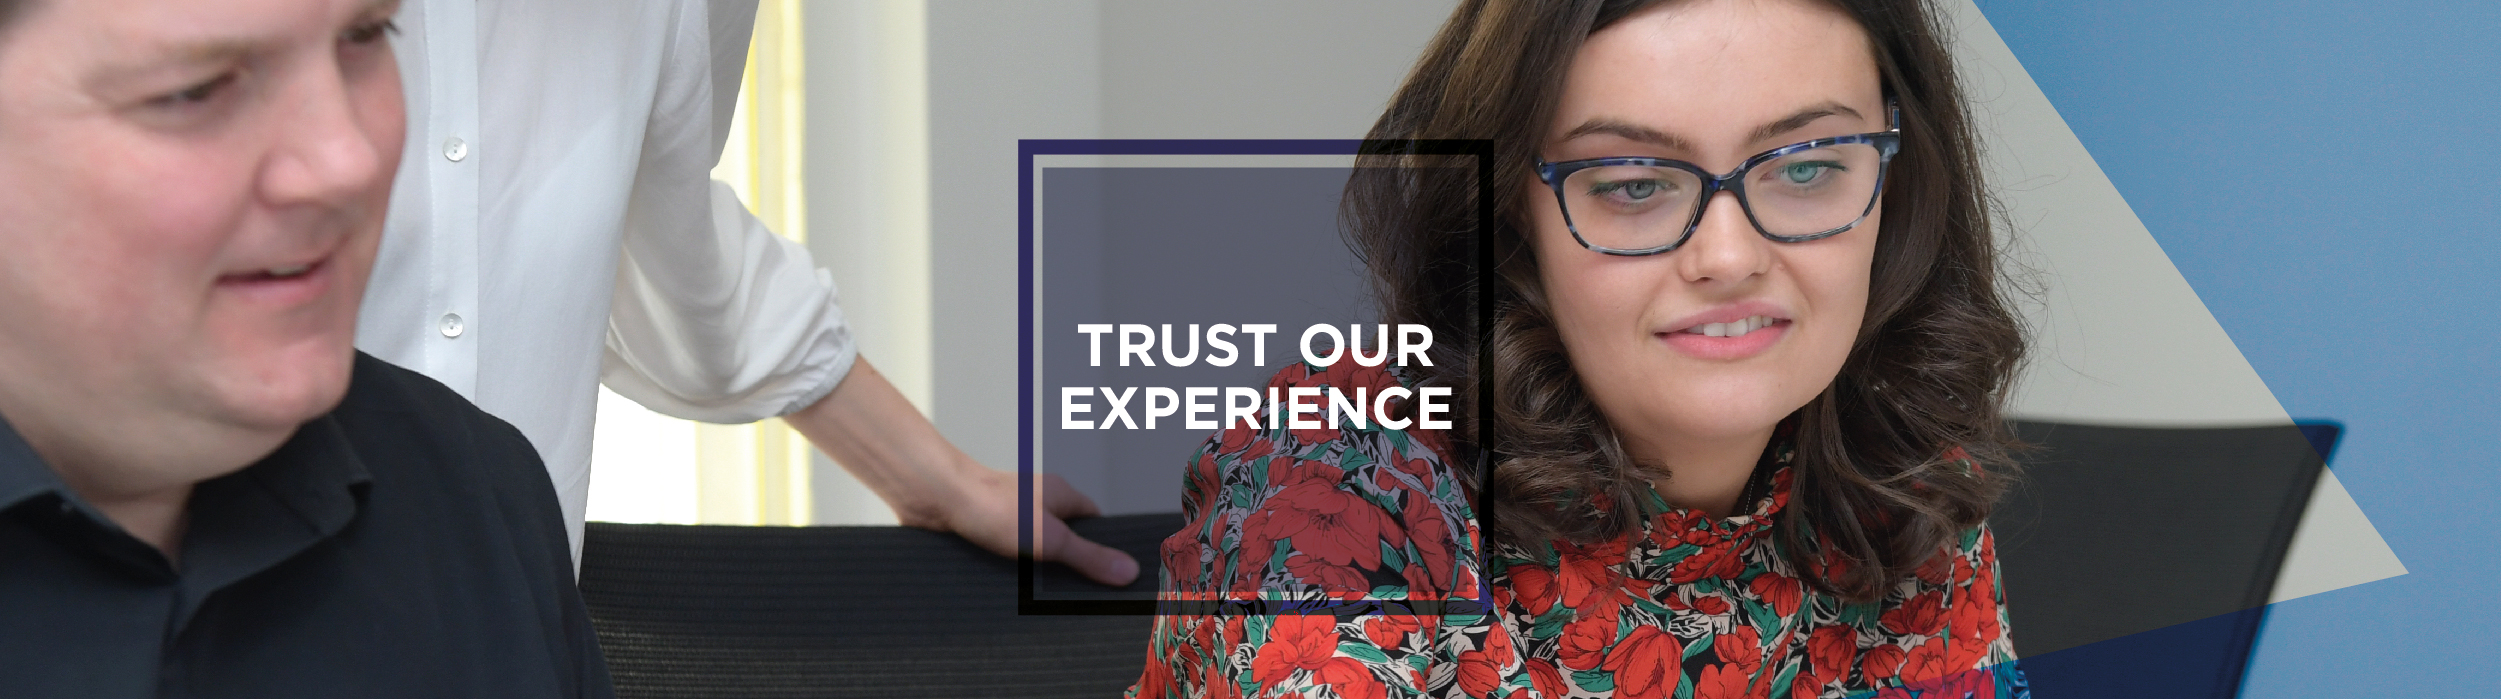 Trust Our Experience